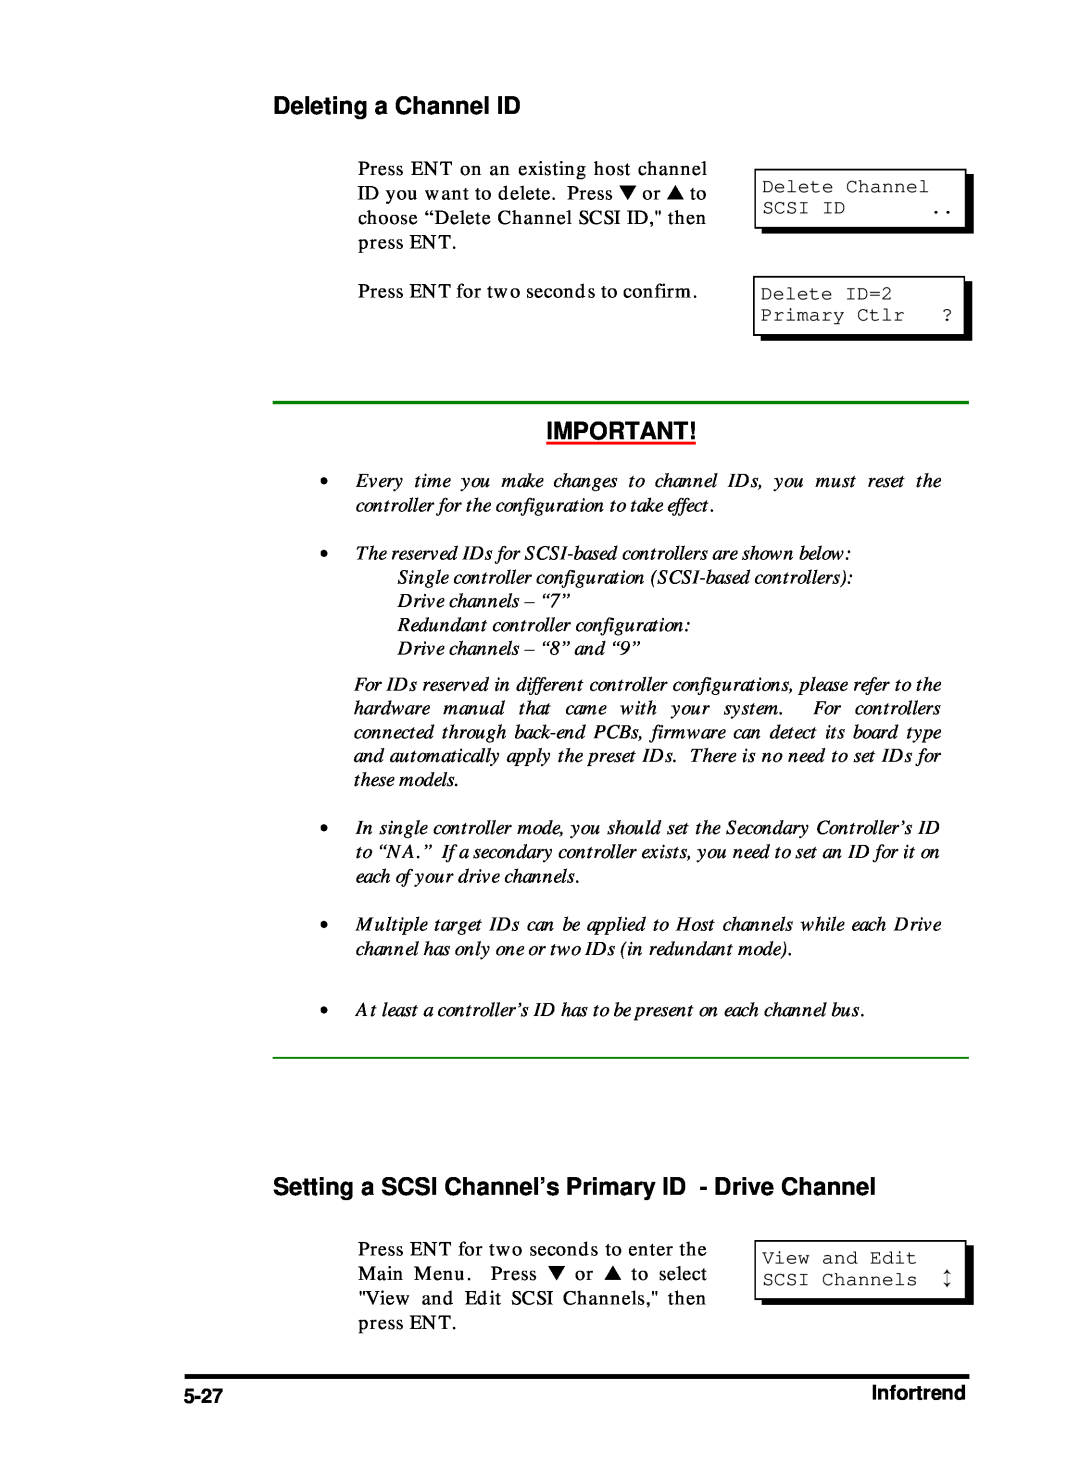 Compaq Infortrend manual Deleting a Channel ID, Setting a SCSI Channel’s Primary ID - Drive Channel 